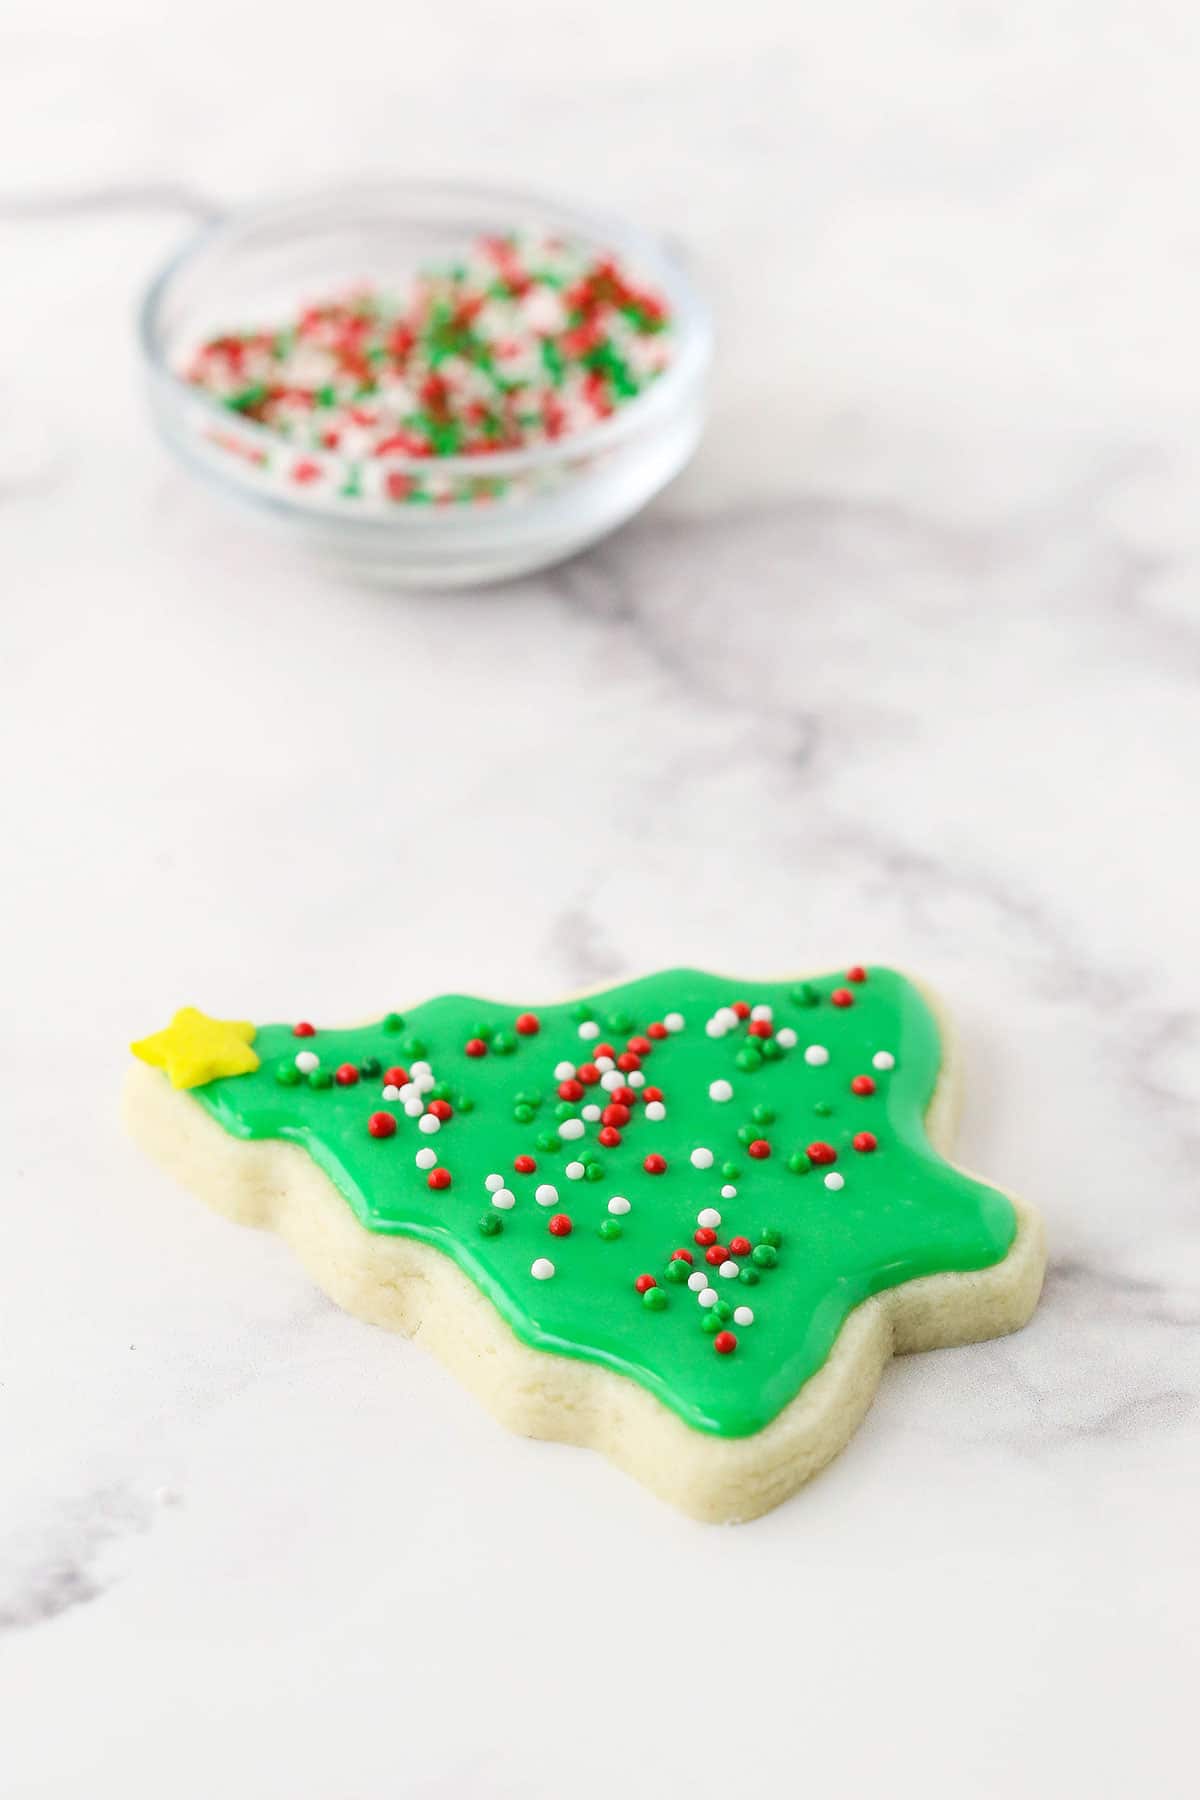 A cut-out Christmas tree sugar cookie with icing and sprinkles on a marble countertop with a bowl of sprinkles in the background